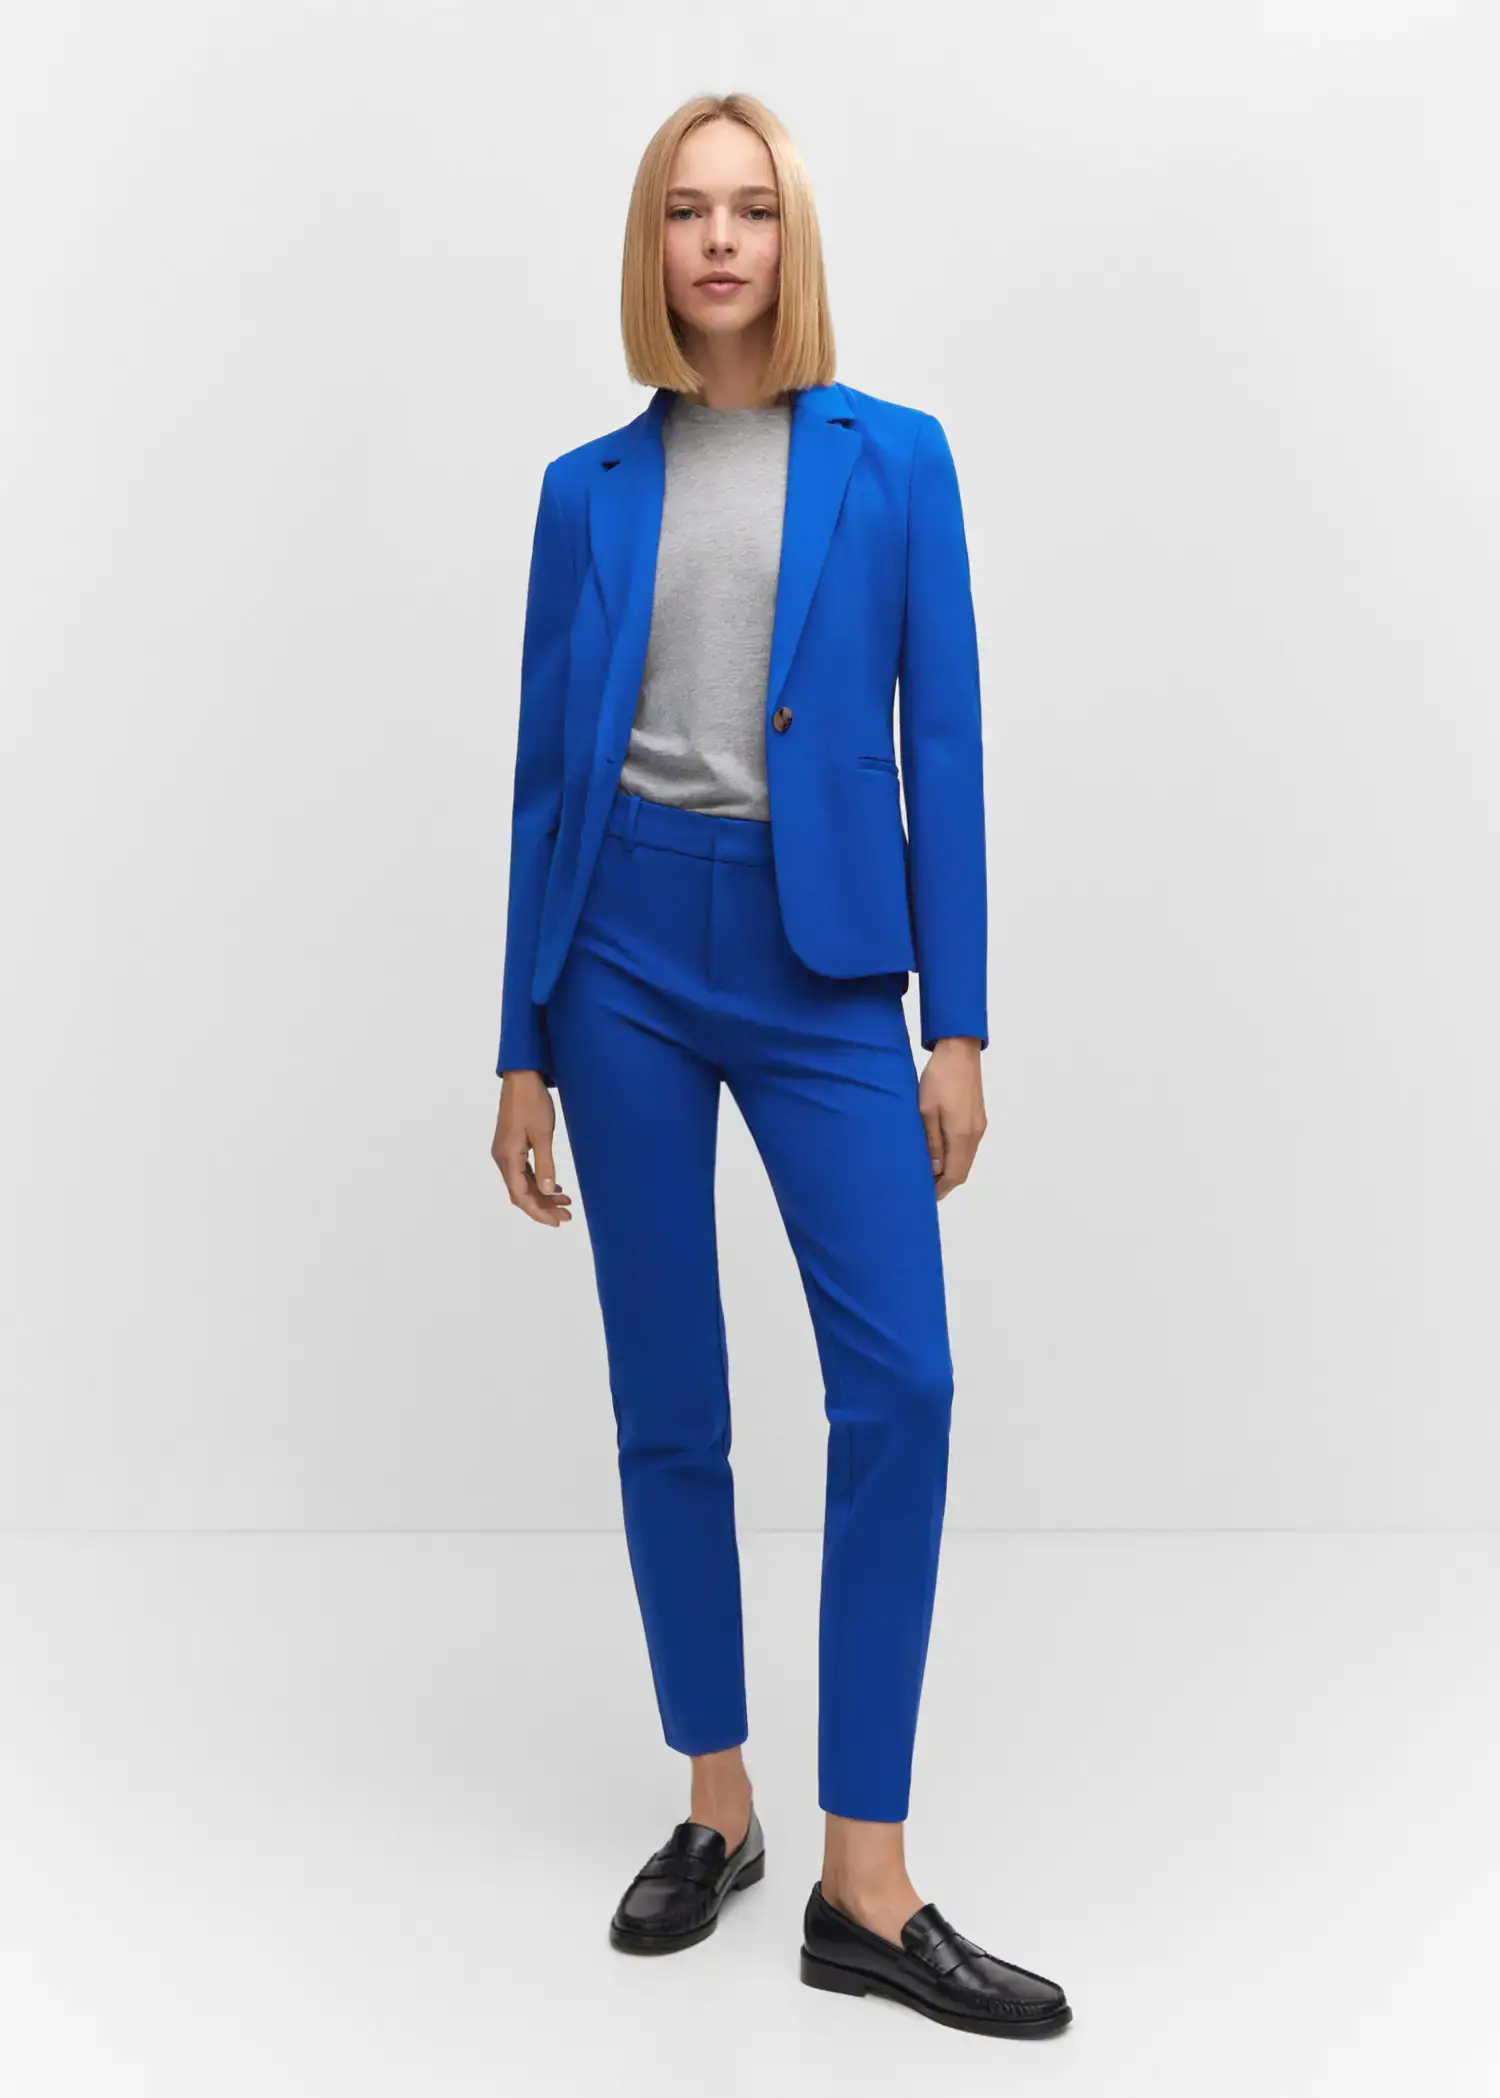 Mango Fitted jacket with blunt stitching. a woman wearing a blue suit standing in a room. 